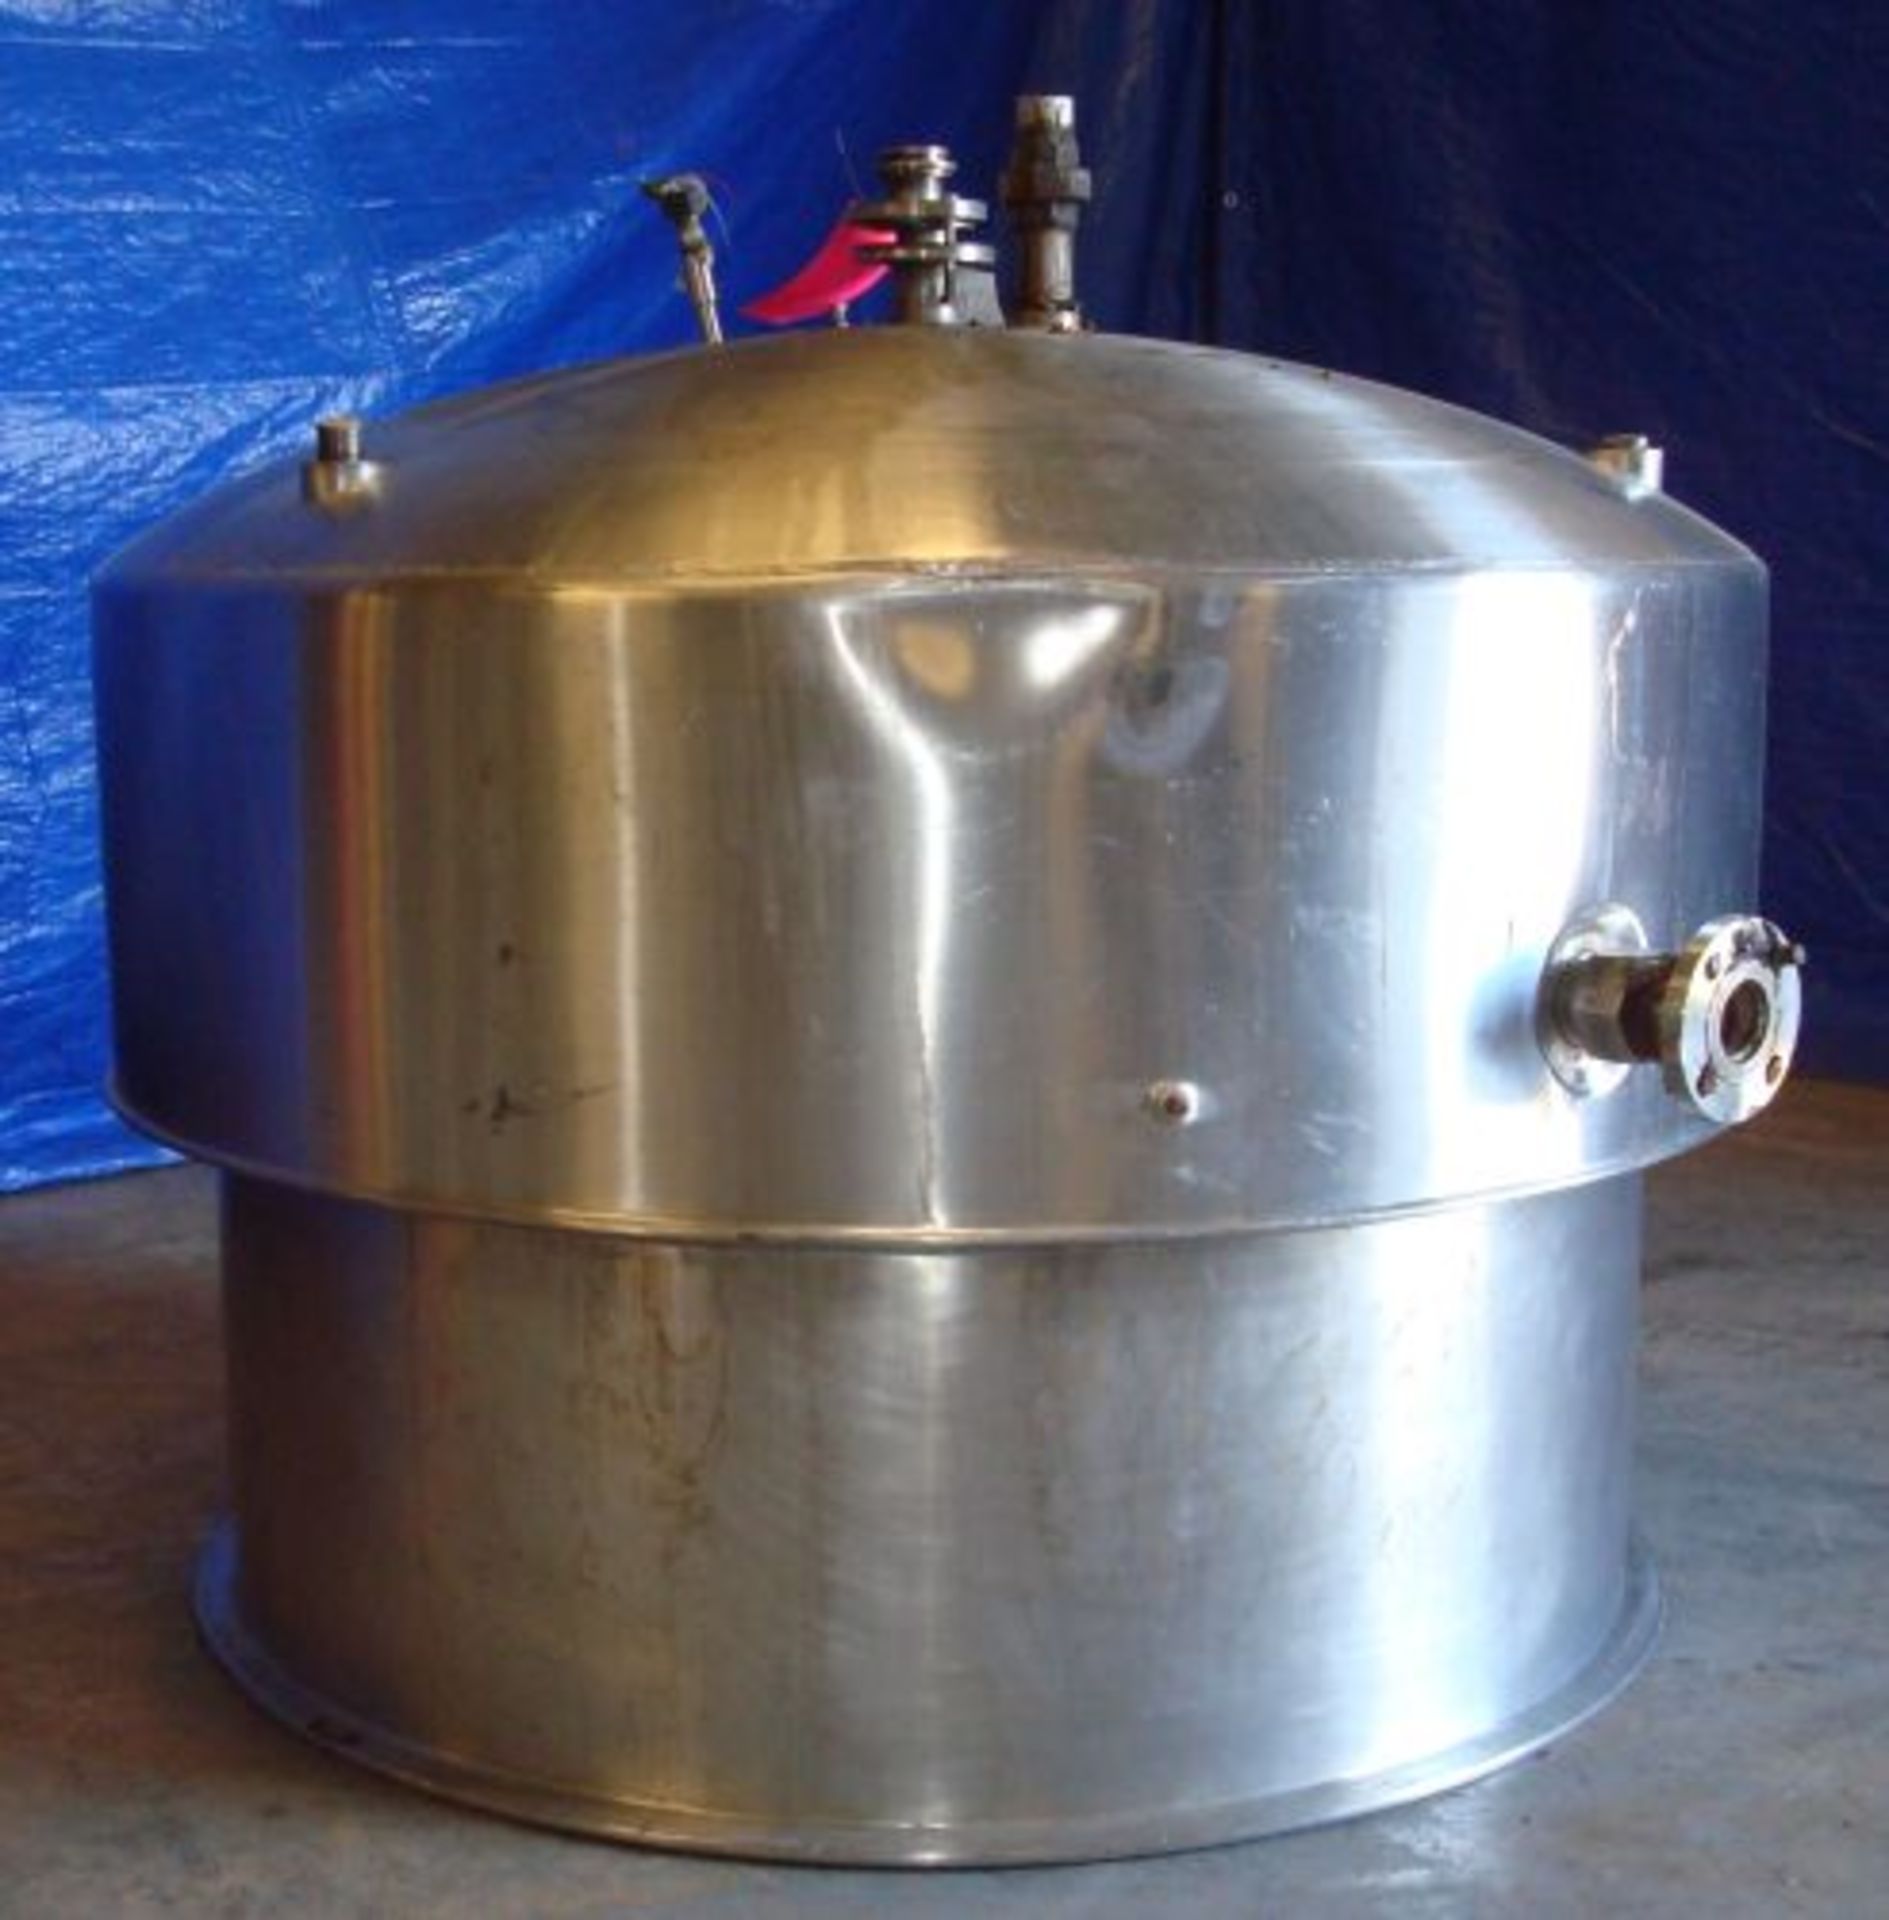 450 gallon J. C. Pardo stainless steel steam jacketed kettle